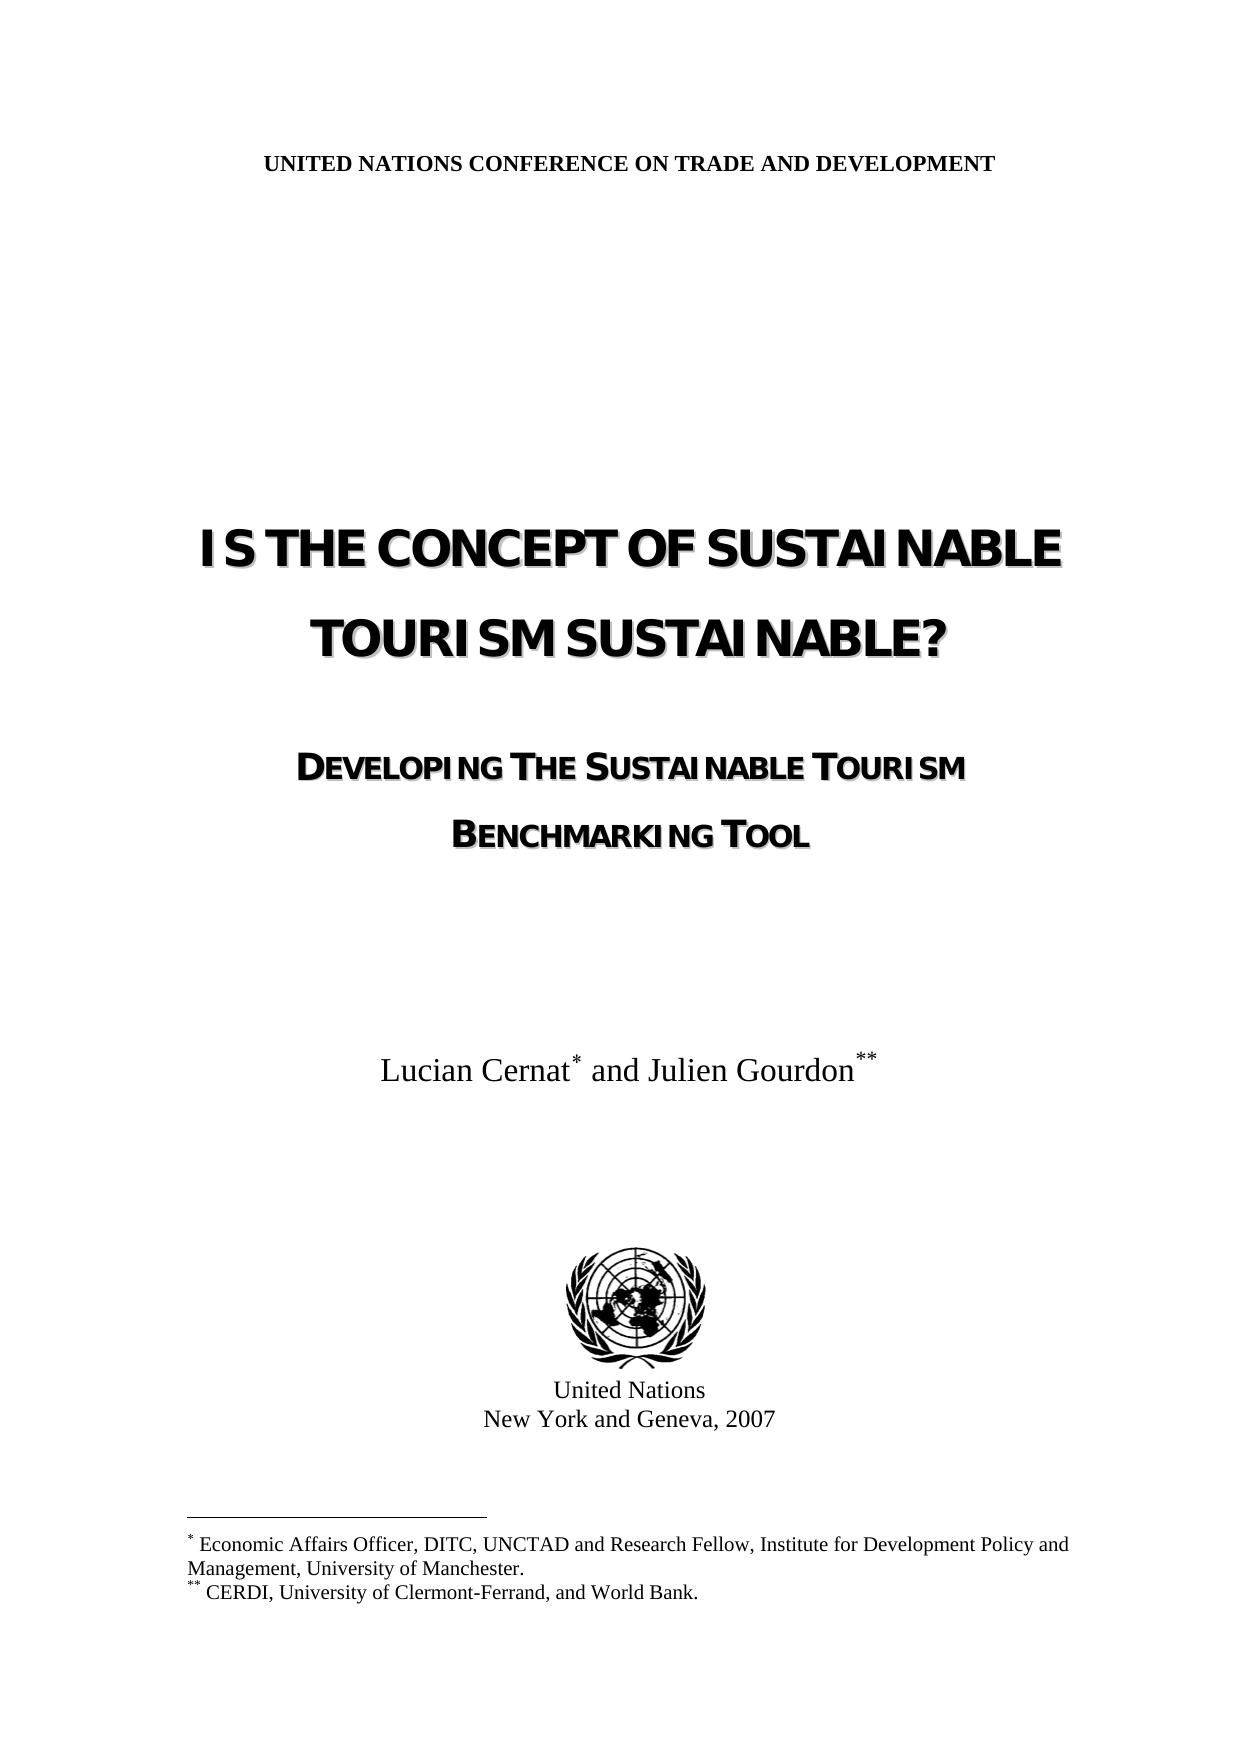 DEVELOPING THE SUSTAINABLE TOURISM BENCHMARKING TOOL 2007